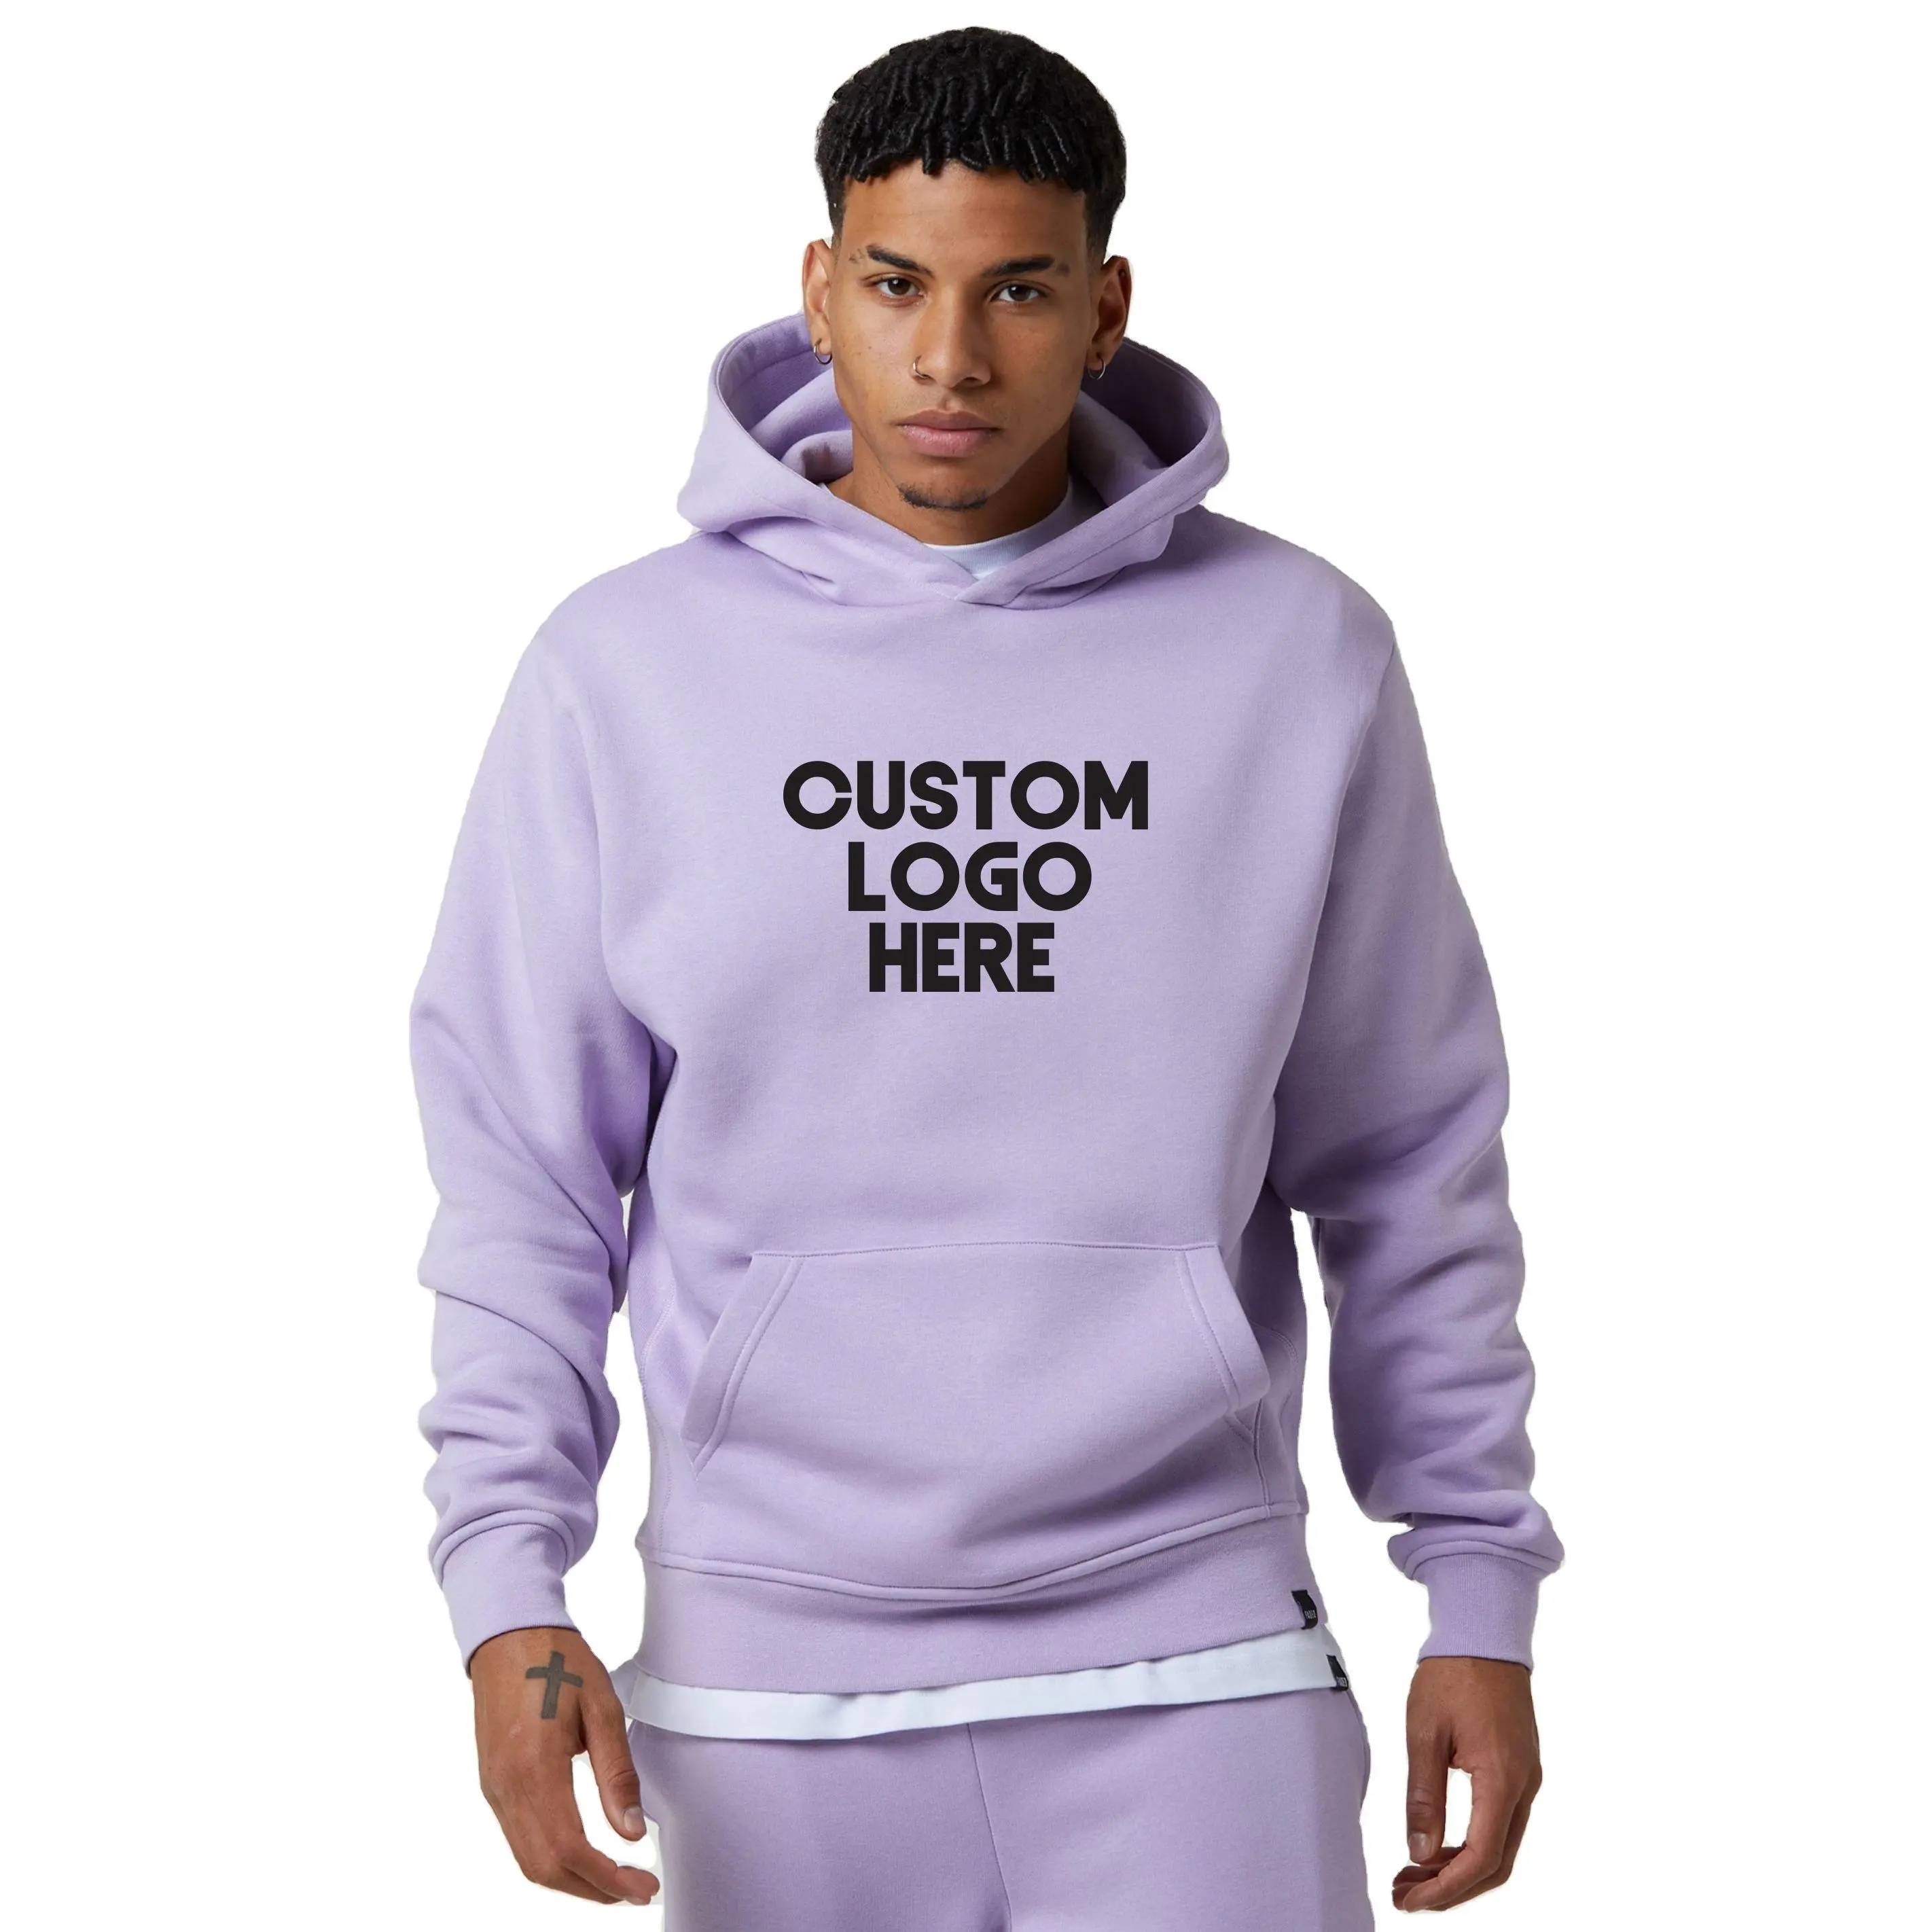 Wholesale Customize Logo Fashion Sports Cotton Heavy Weight High Quality Warm Oversize Men's Solid Color Hoodies and Sweatshirts